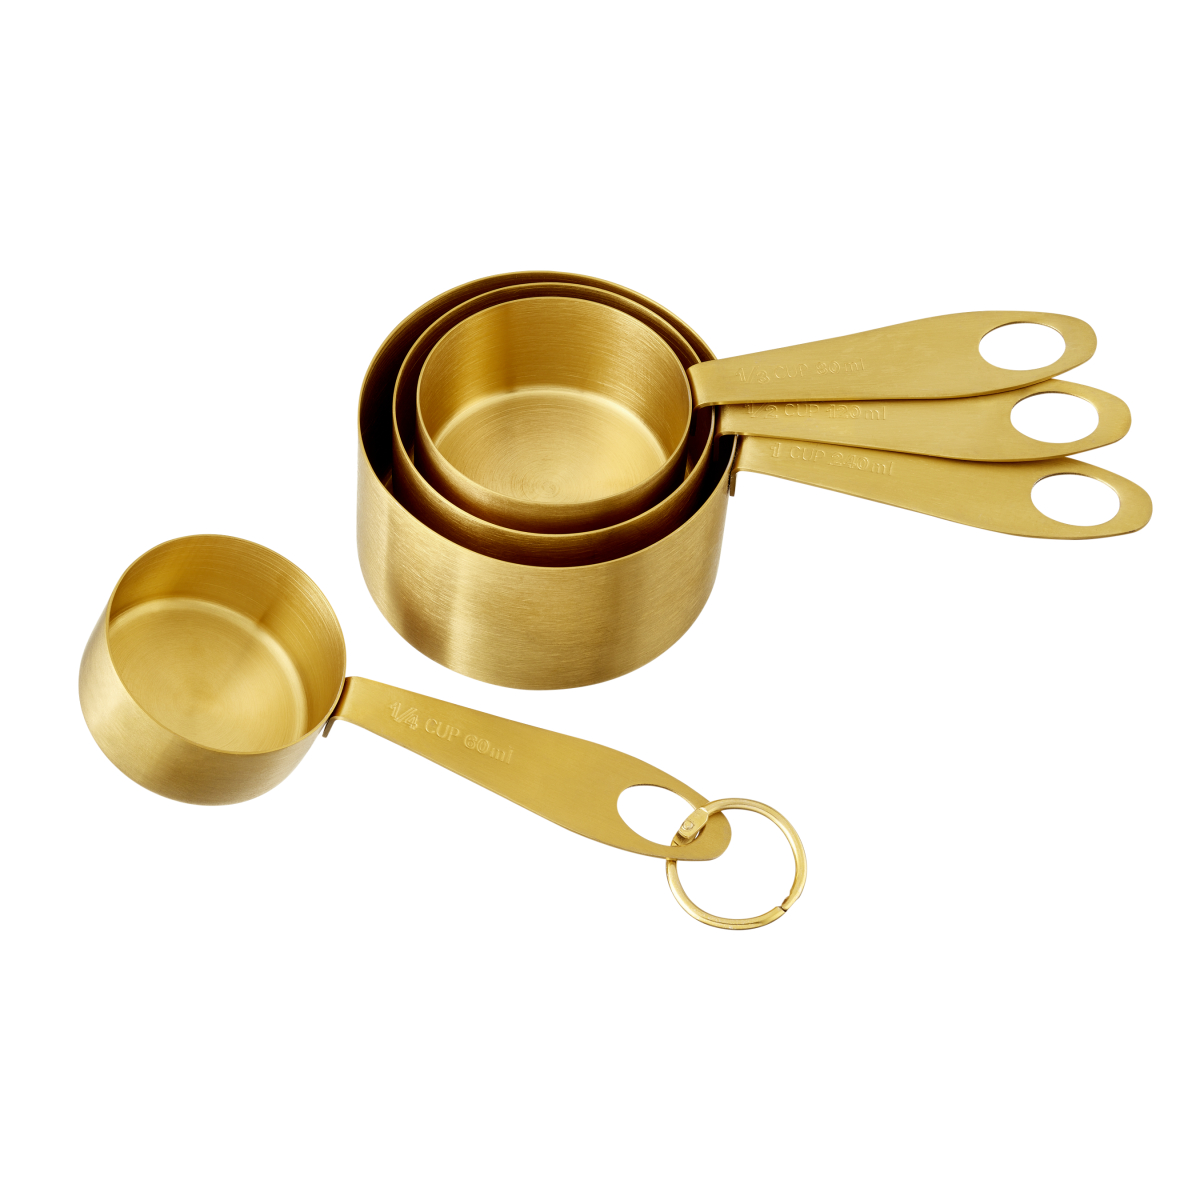 The Container Store Stainless Measuring Cups Gold Set of 4